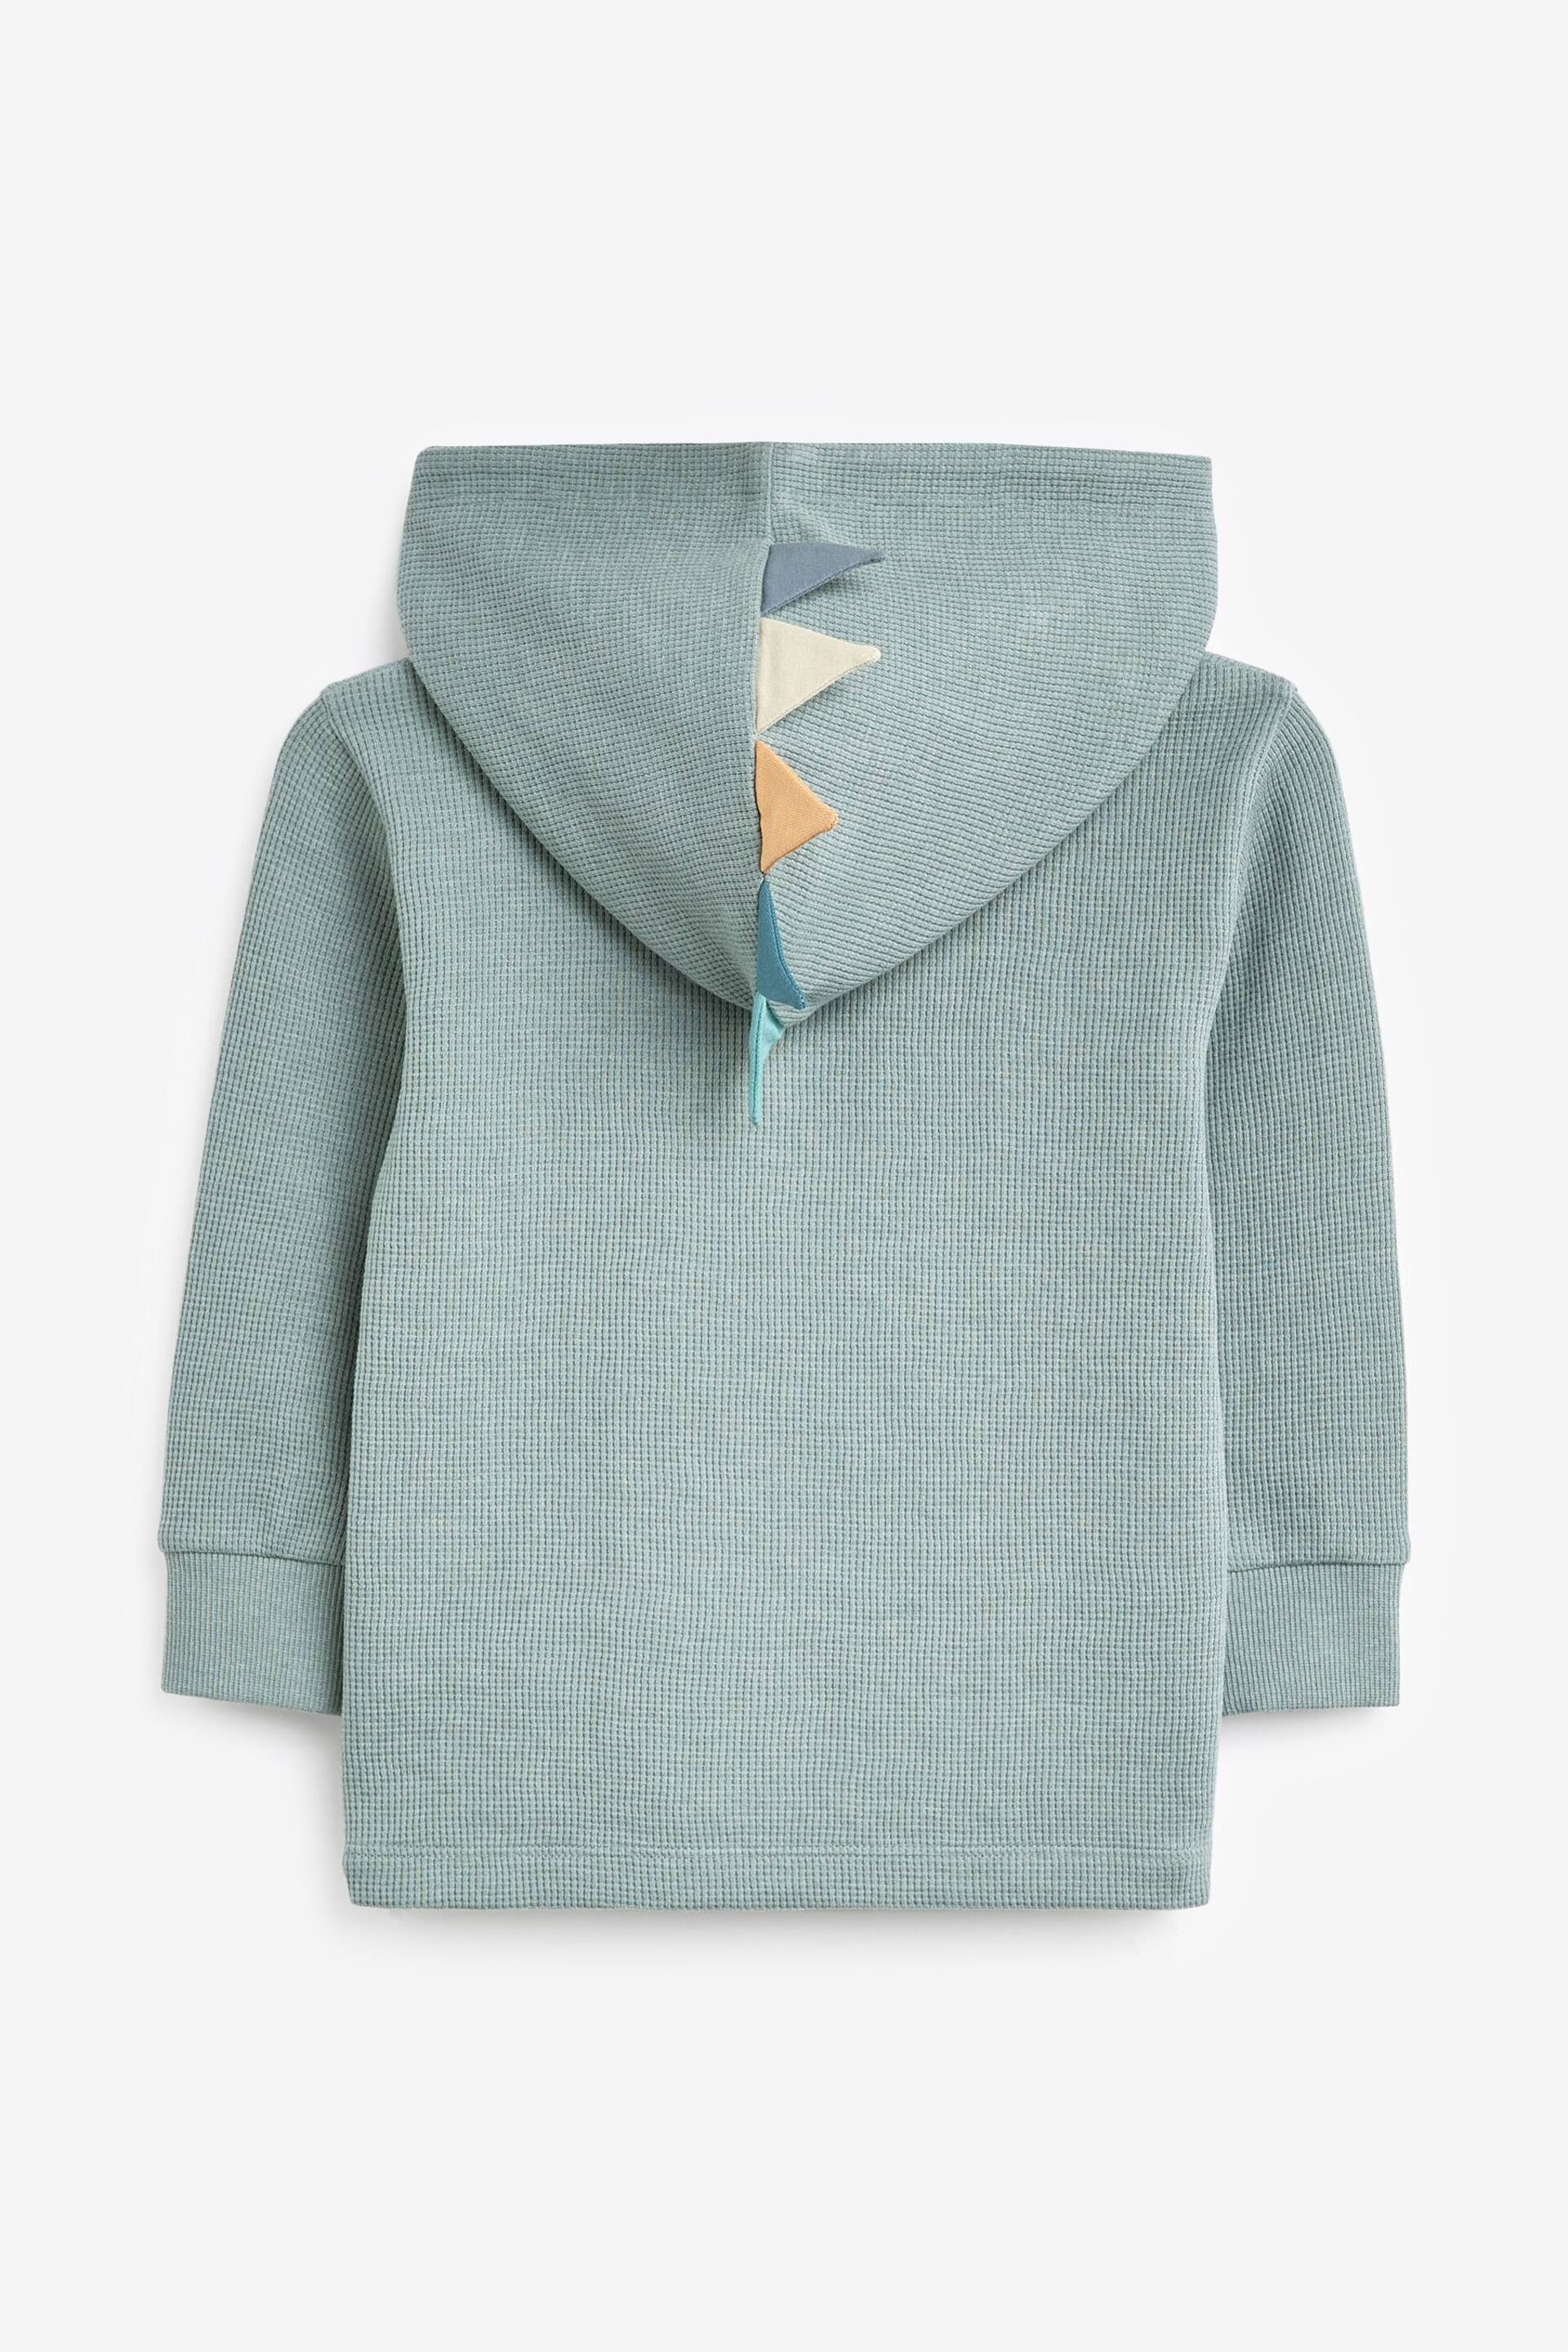 Mineral Blue Textured Jersey Dino Spikes Hoodie (3mths-10yrs) - Image 2 of 2